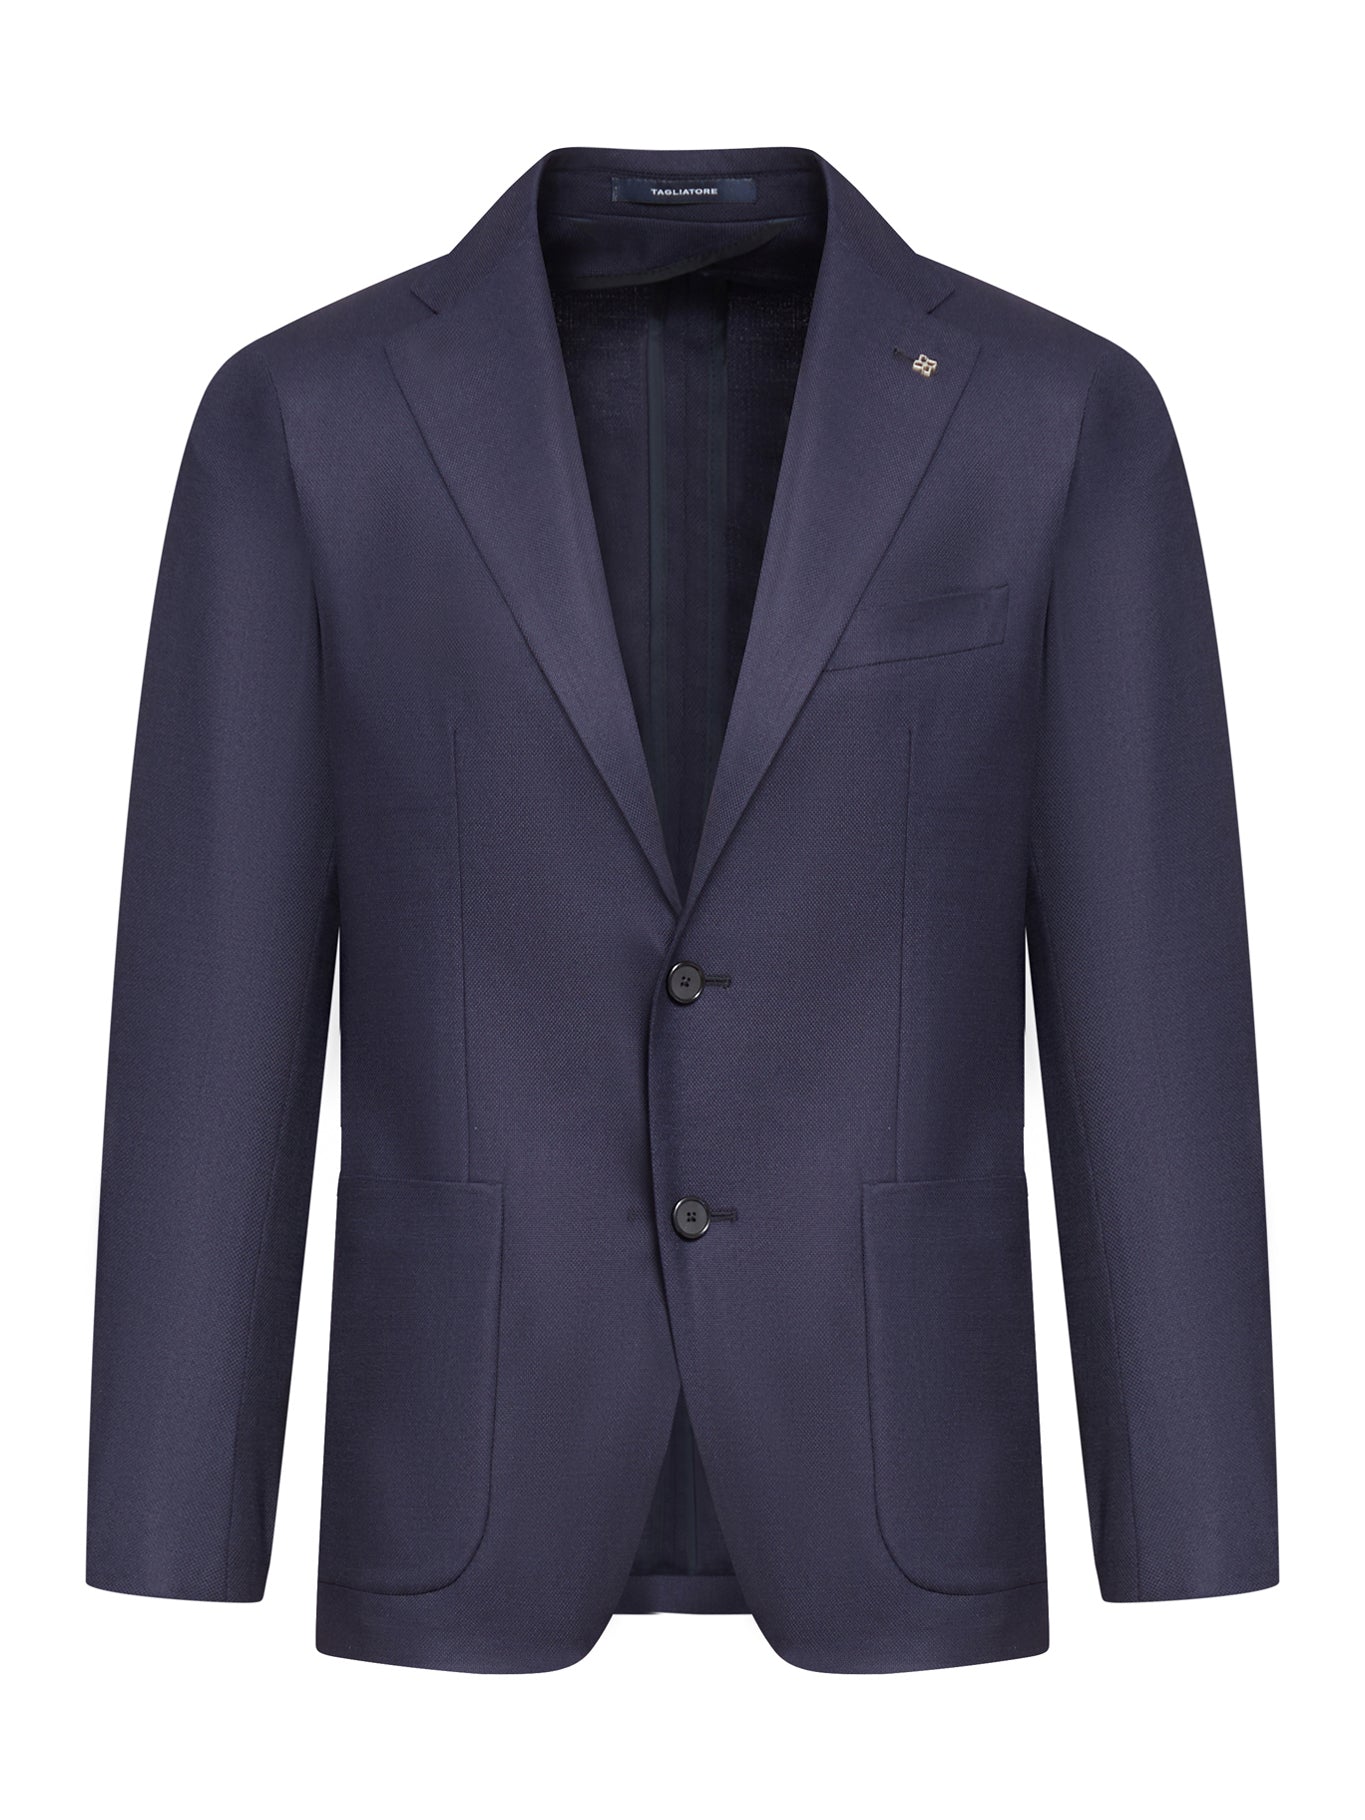 Tagliatore single-breasted tailored suit - Grey